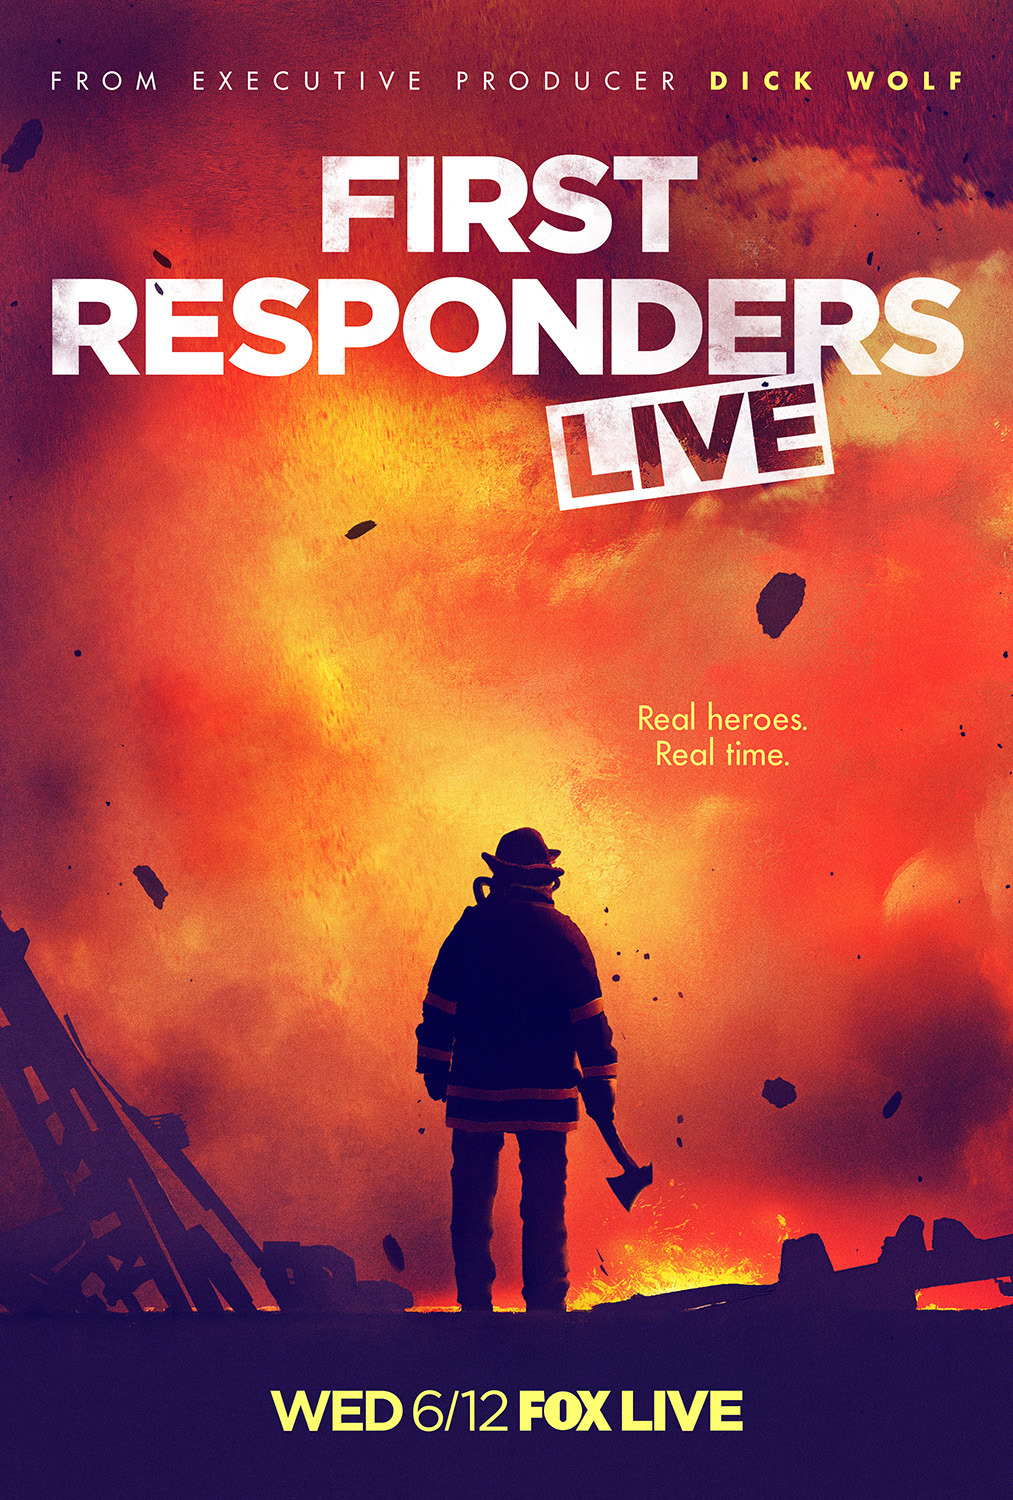 Extra Large TV Poster Image for First Responders Live 